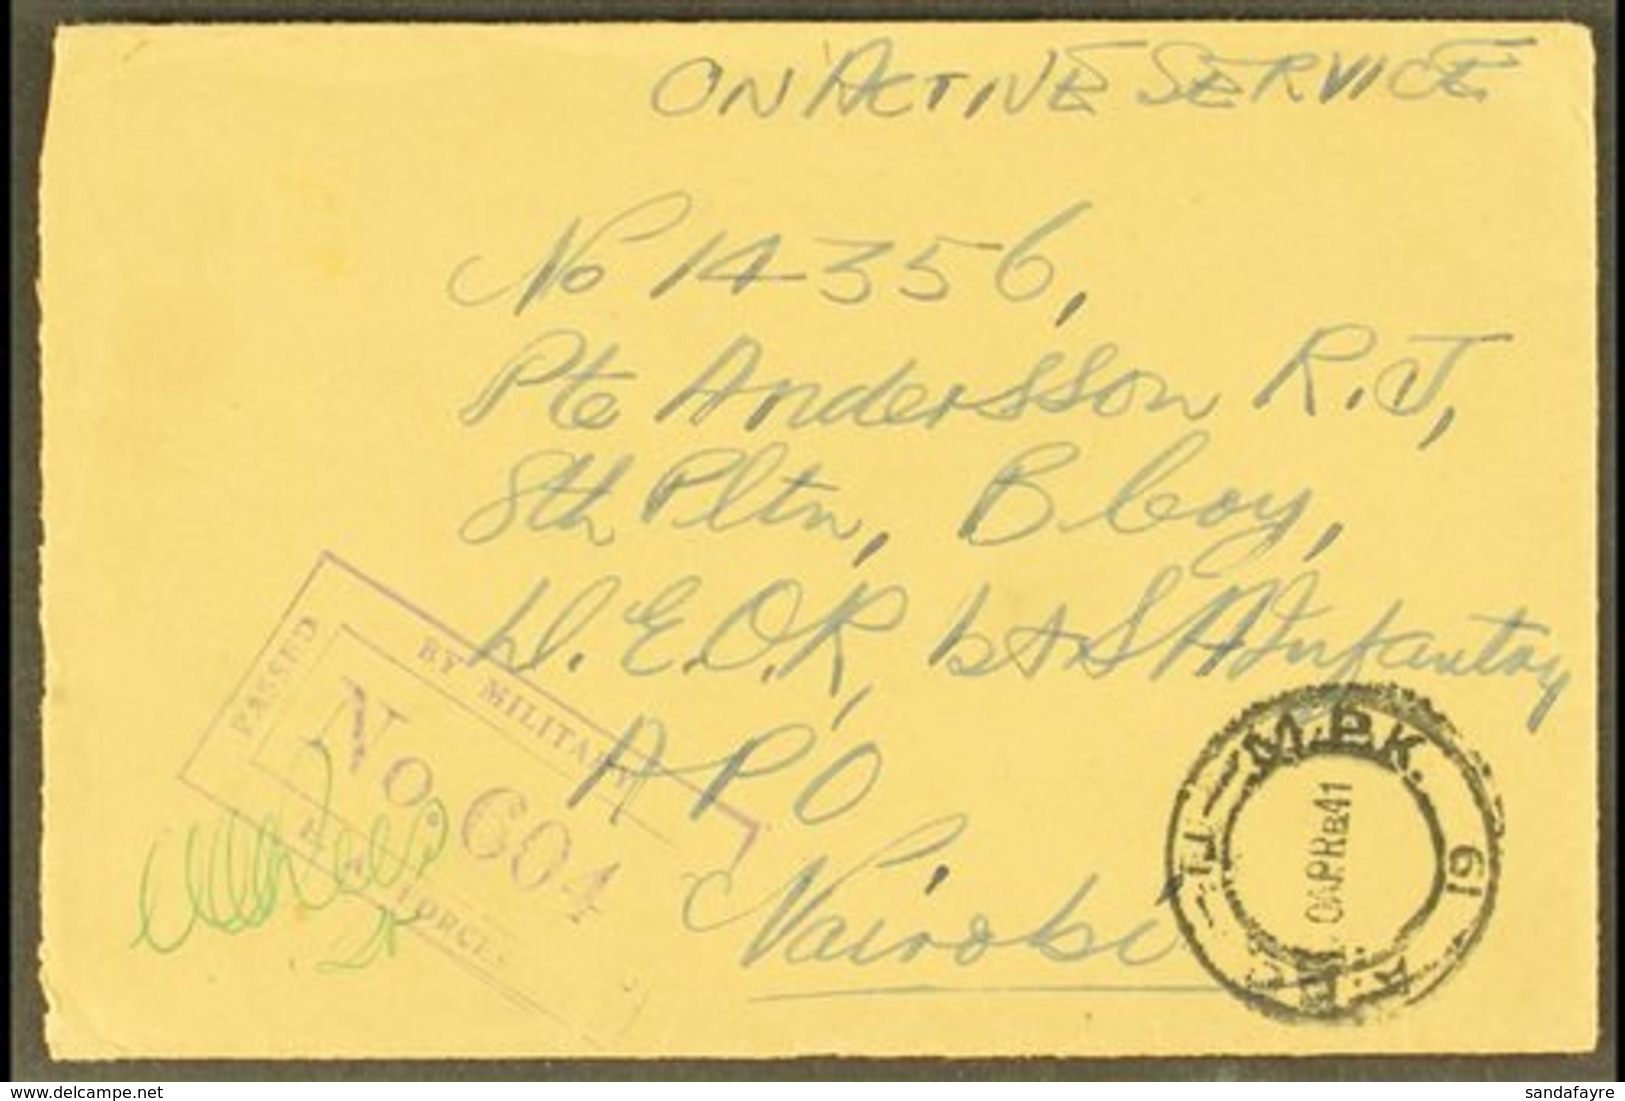 1941 Stampless Envelope Endorsed "On Active Service" And Posted To Kenya, Kismayu  "A.P.O. - U - M.P.K. 19" Postmark App - Somaliland (Protectorate ...-1959)